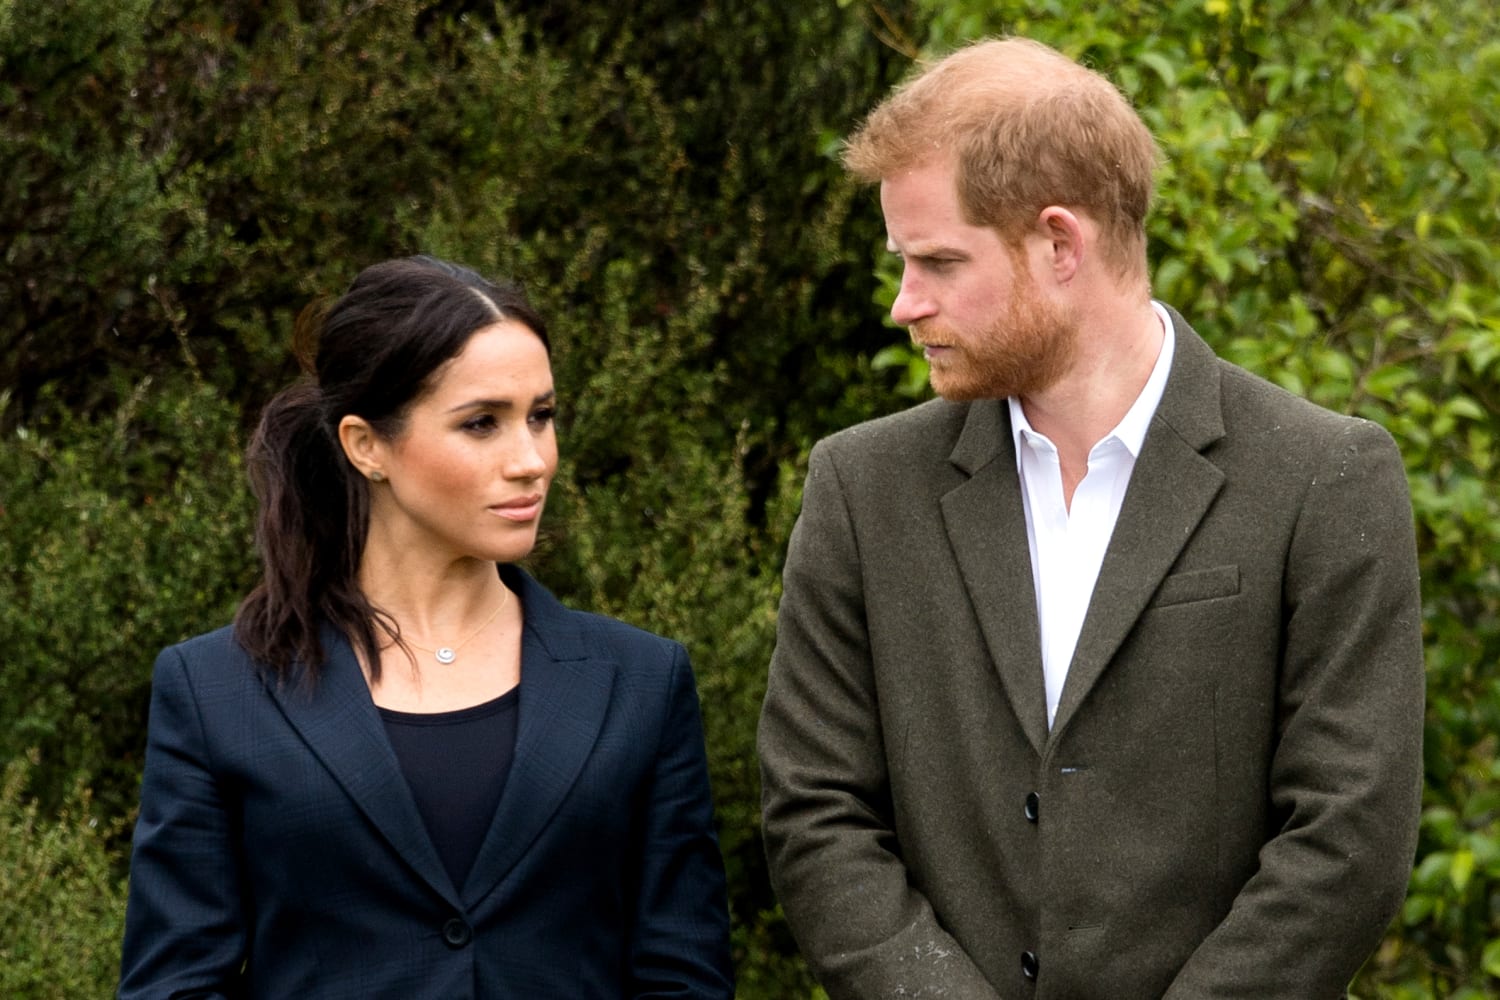 British tabloids find yet another reason to try to take down Meghan, Duchess of Sussex